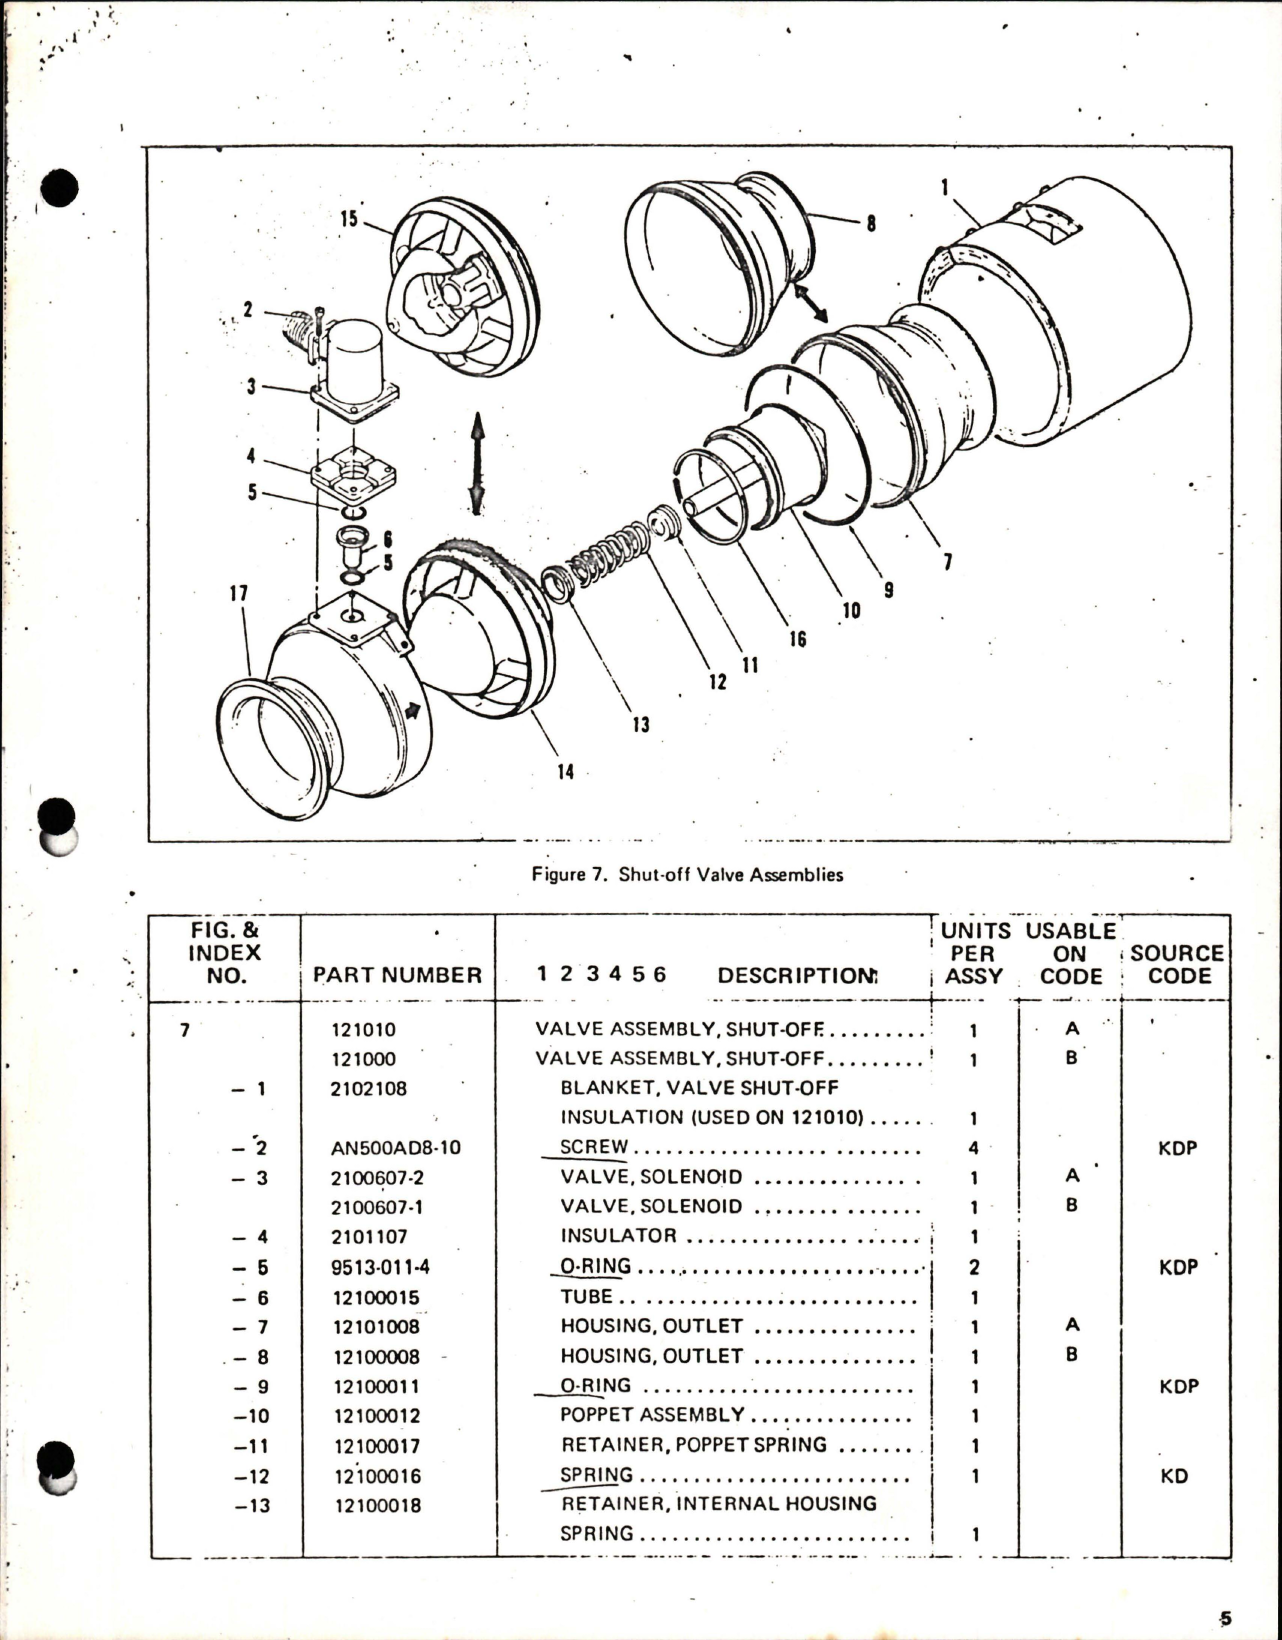 Sample page 5 from AirCorps Library document: Overhaul with Parts Breakdown for Shut-Off Valve Assemblies - Part 121000-1 and 121010 